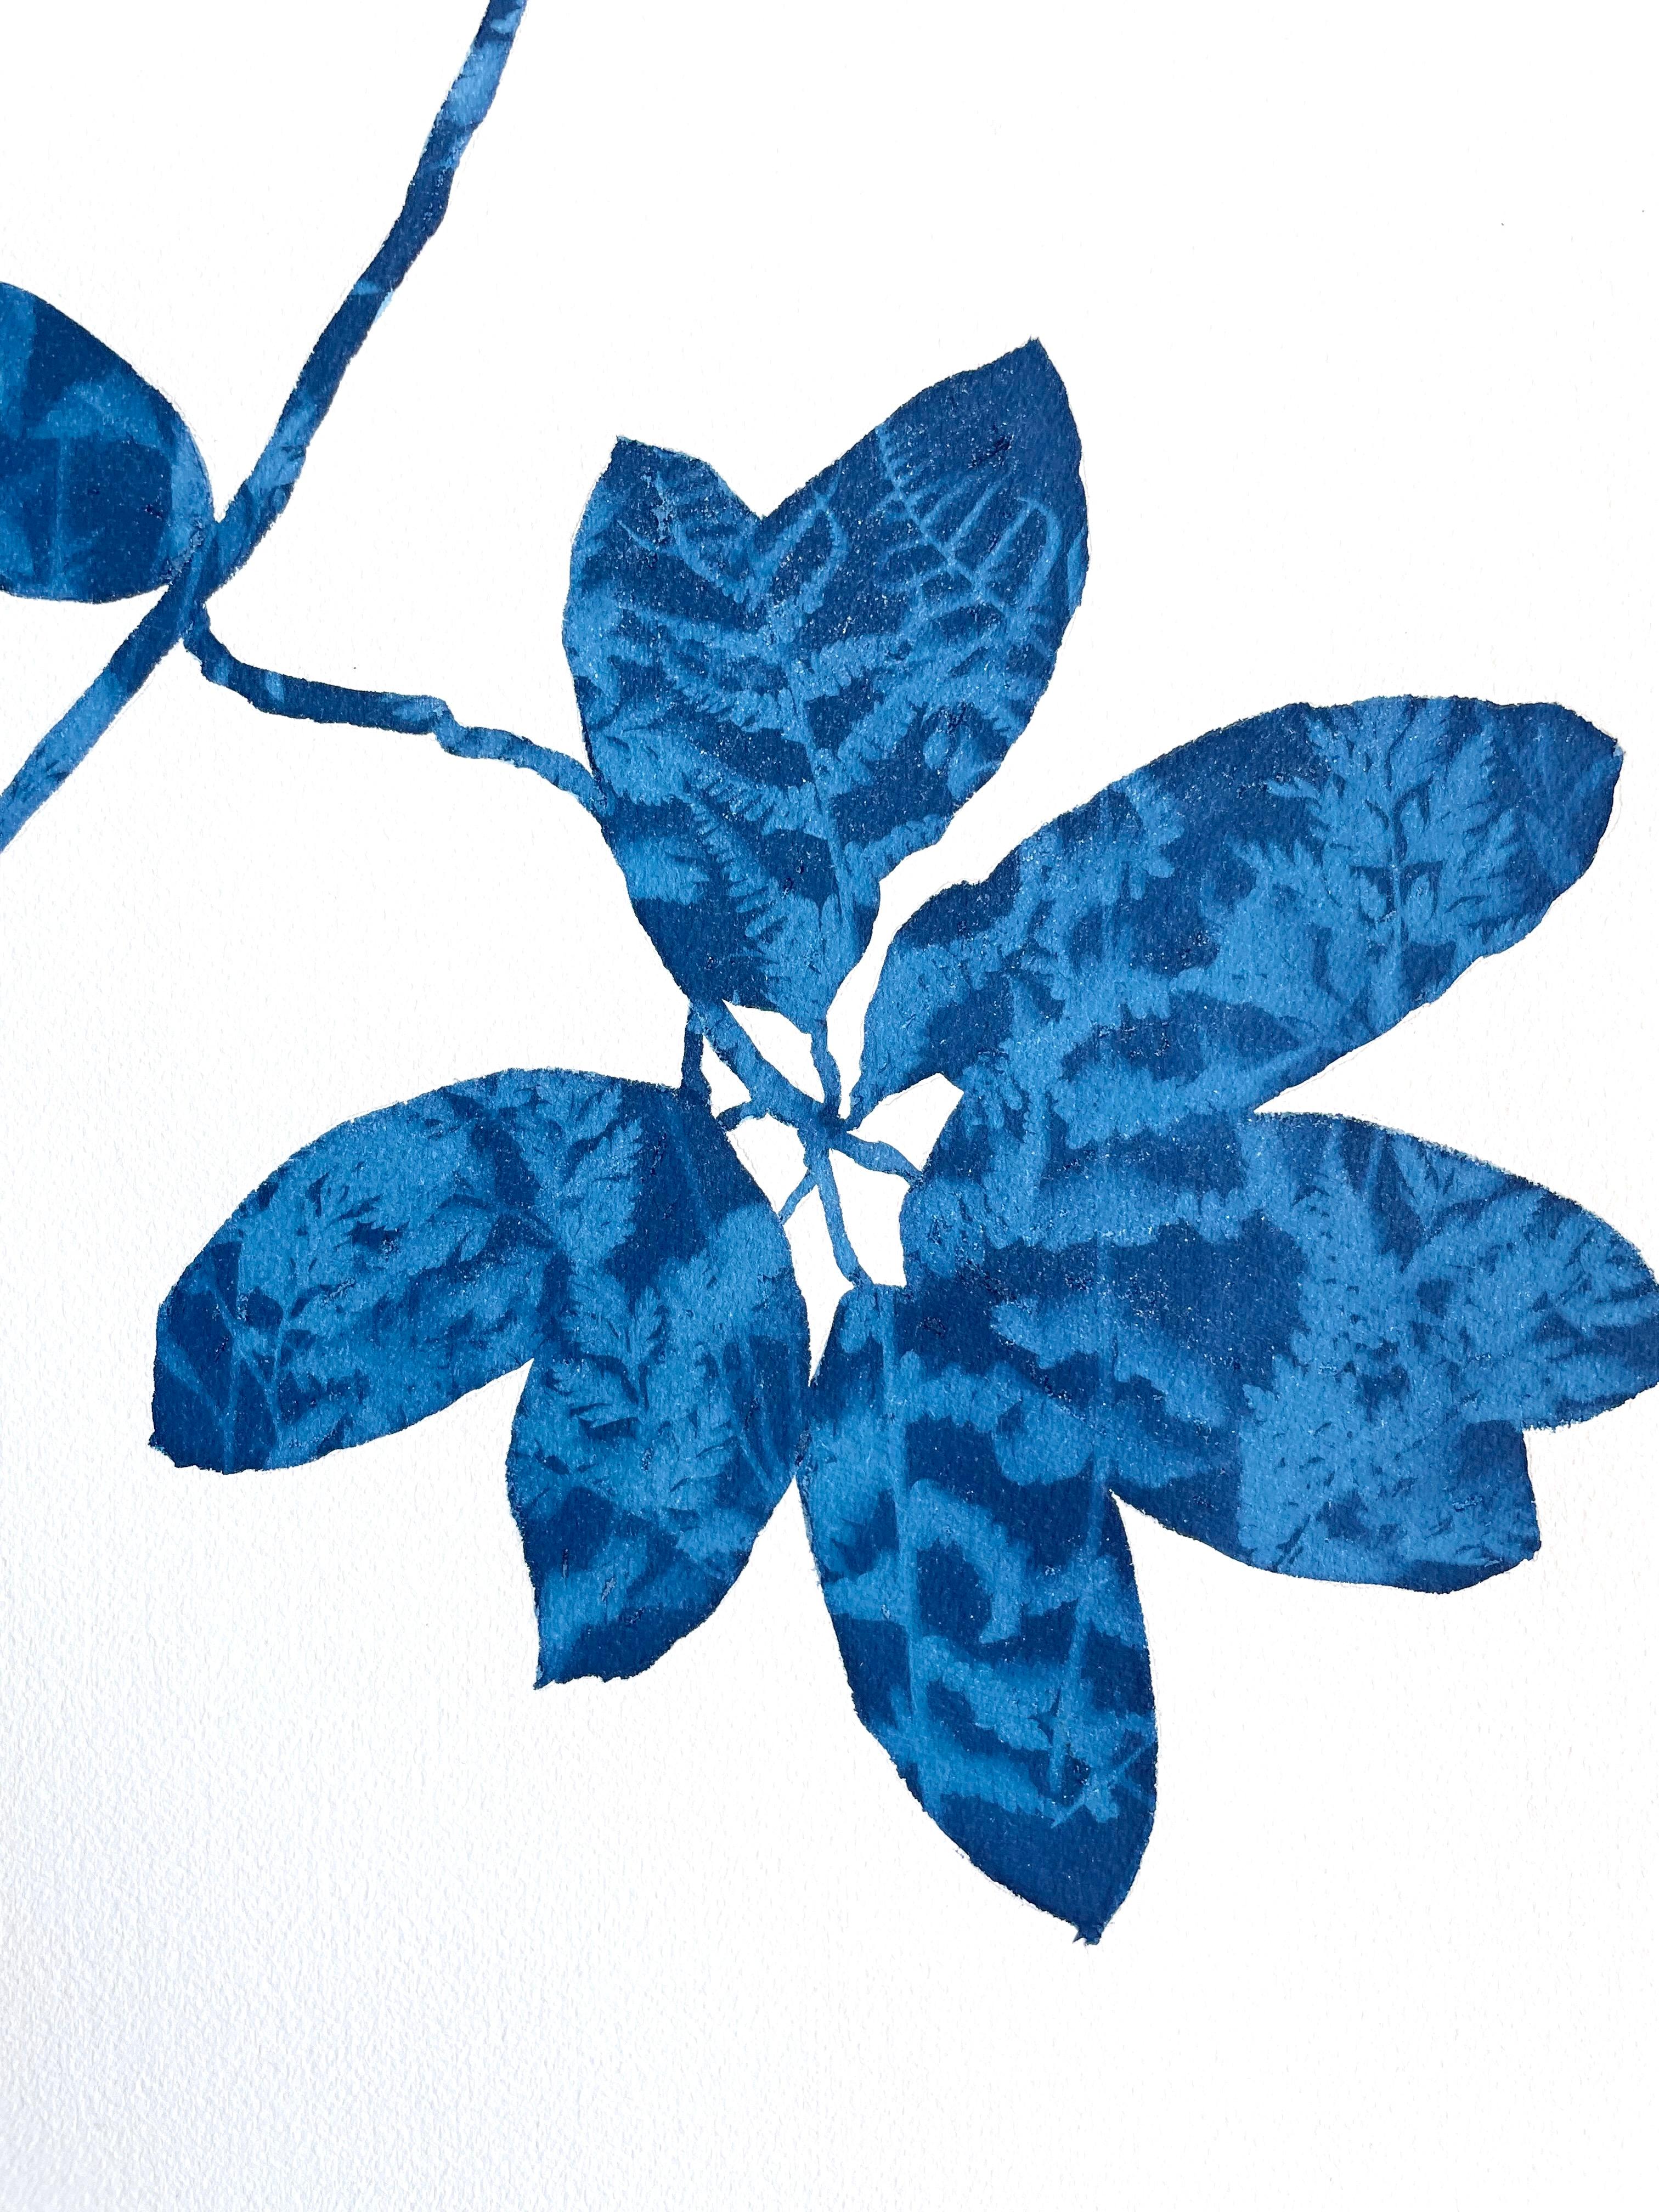 Delft Madrone II  (40 x 26 inch cyanotype painting) For Sale 3